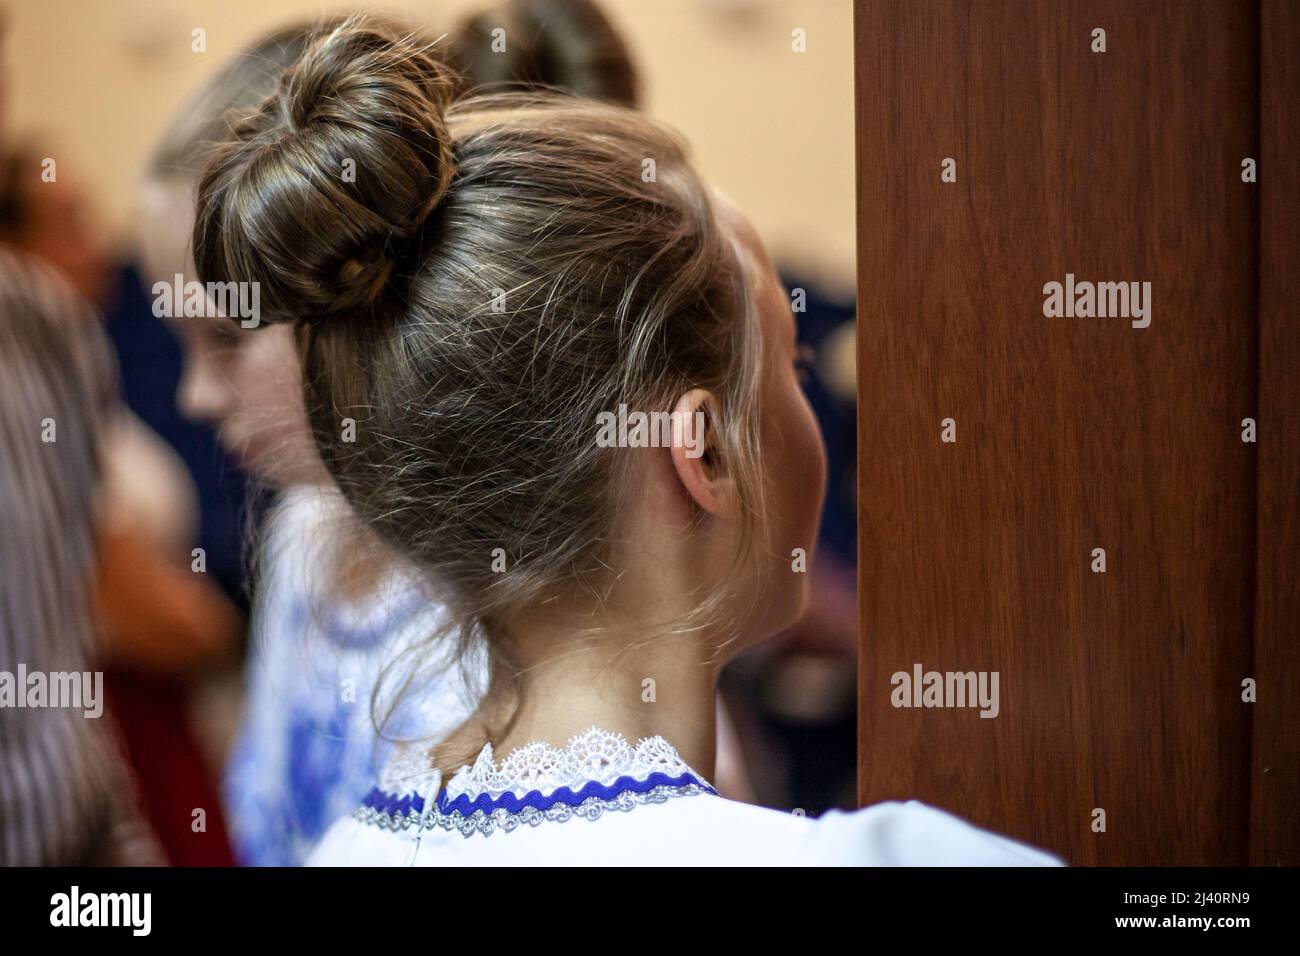 Teenage Girl With Hair Tied Back Closeup Profile High-Res Stock Photo -  Getty Images